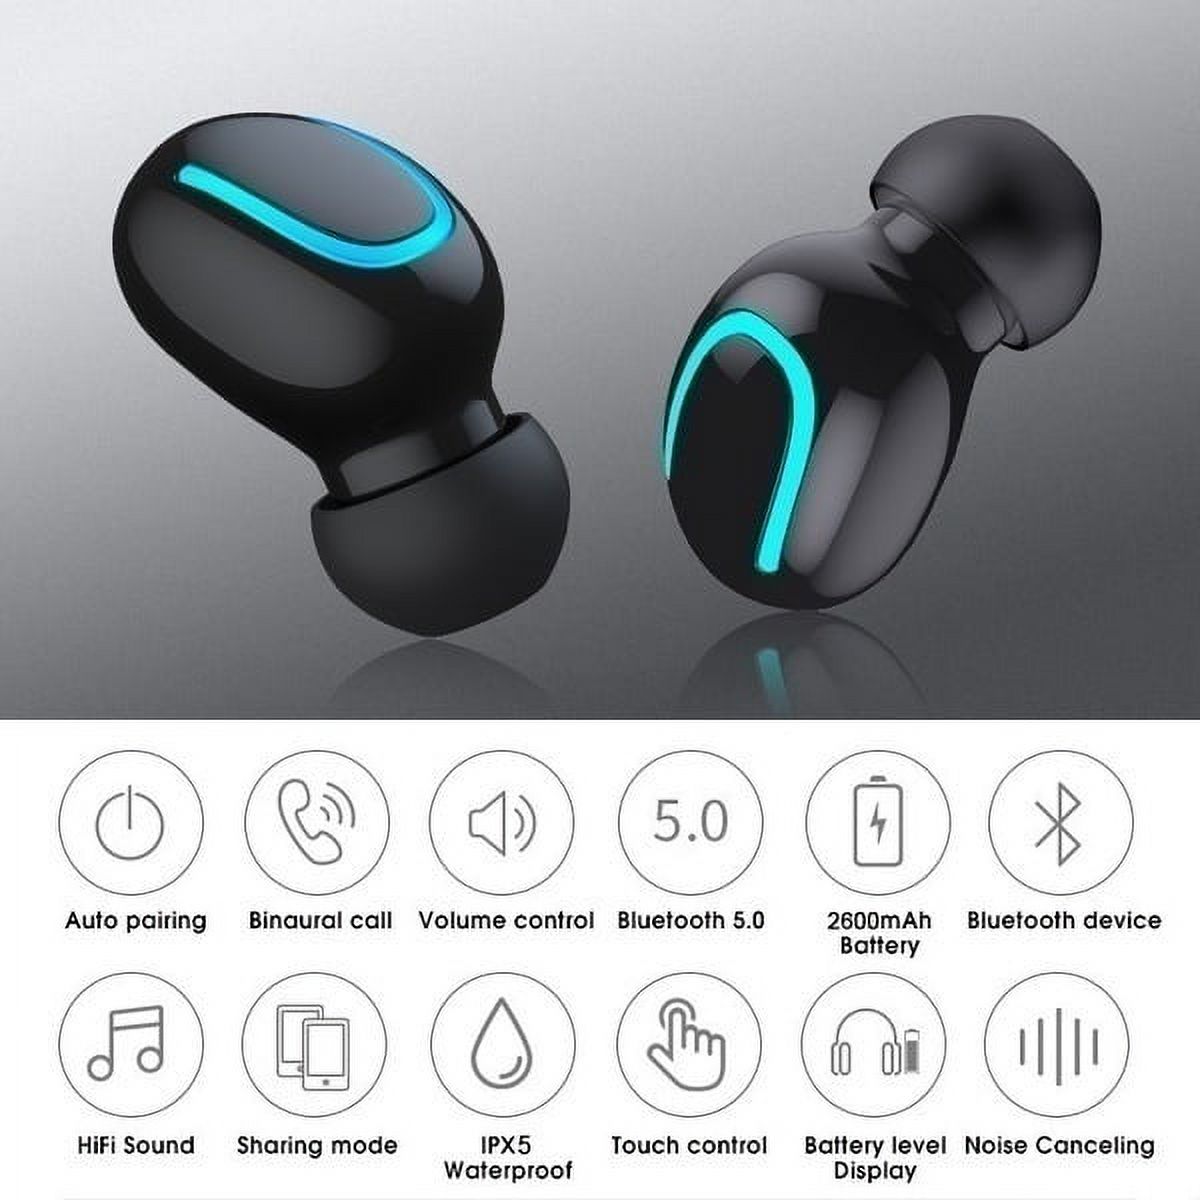 2200mAh/3500mAh Bluetooth 5.0 TWS Wireless Bluetooth Headphones In-ear Earbuds Ear Buds Twins Earphones Noise Reduction Earbud Headset with Charging Box - image 5 of 8